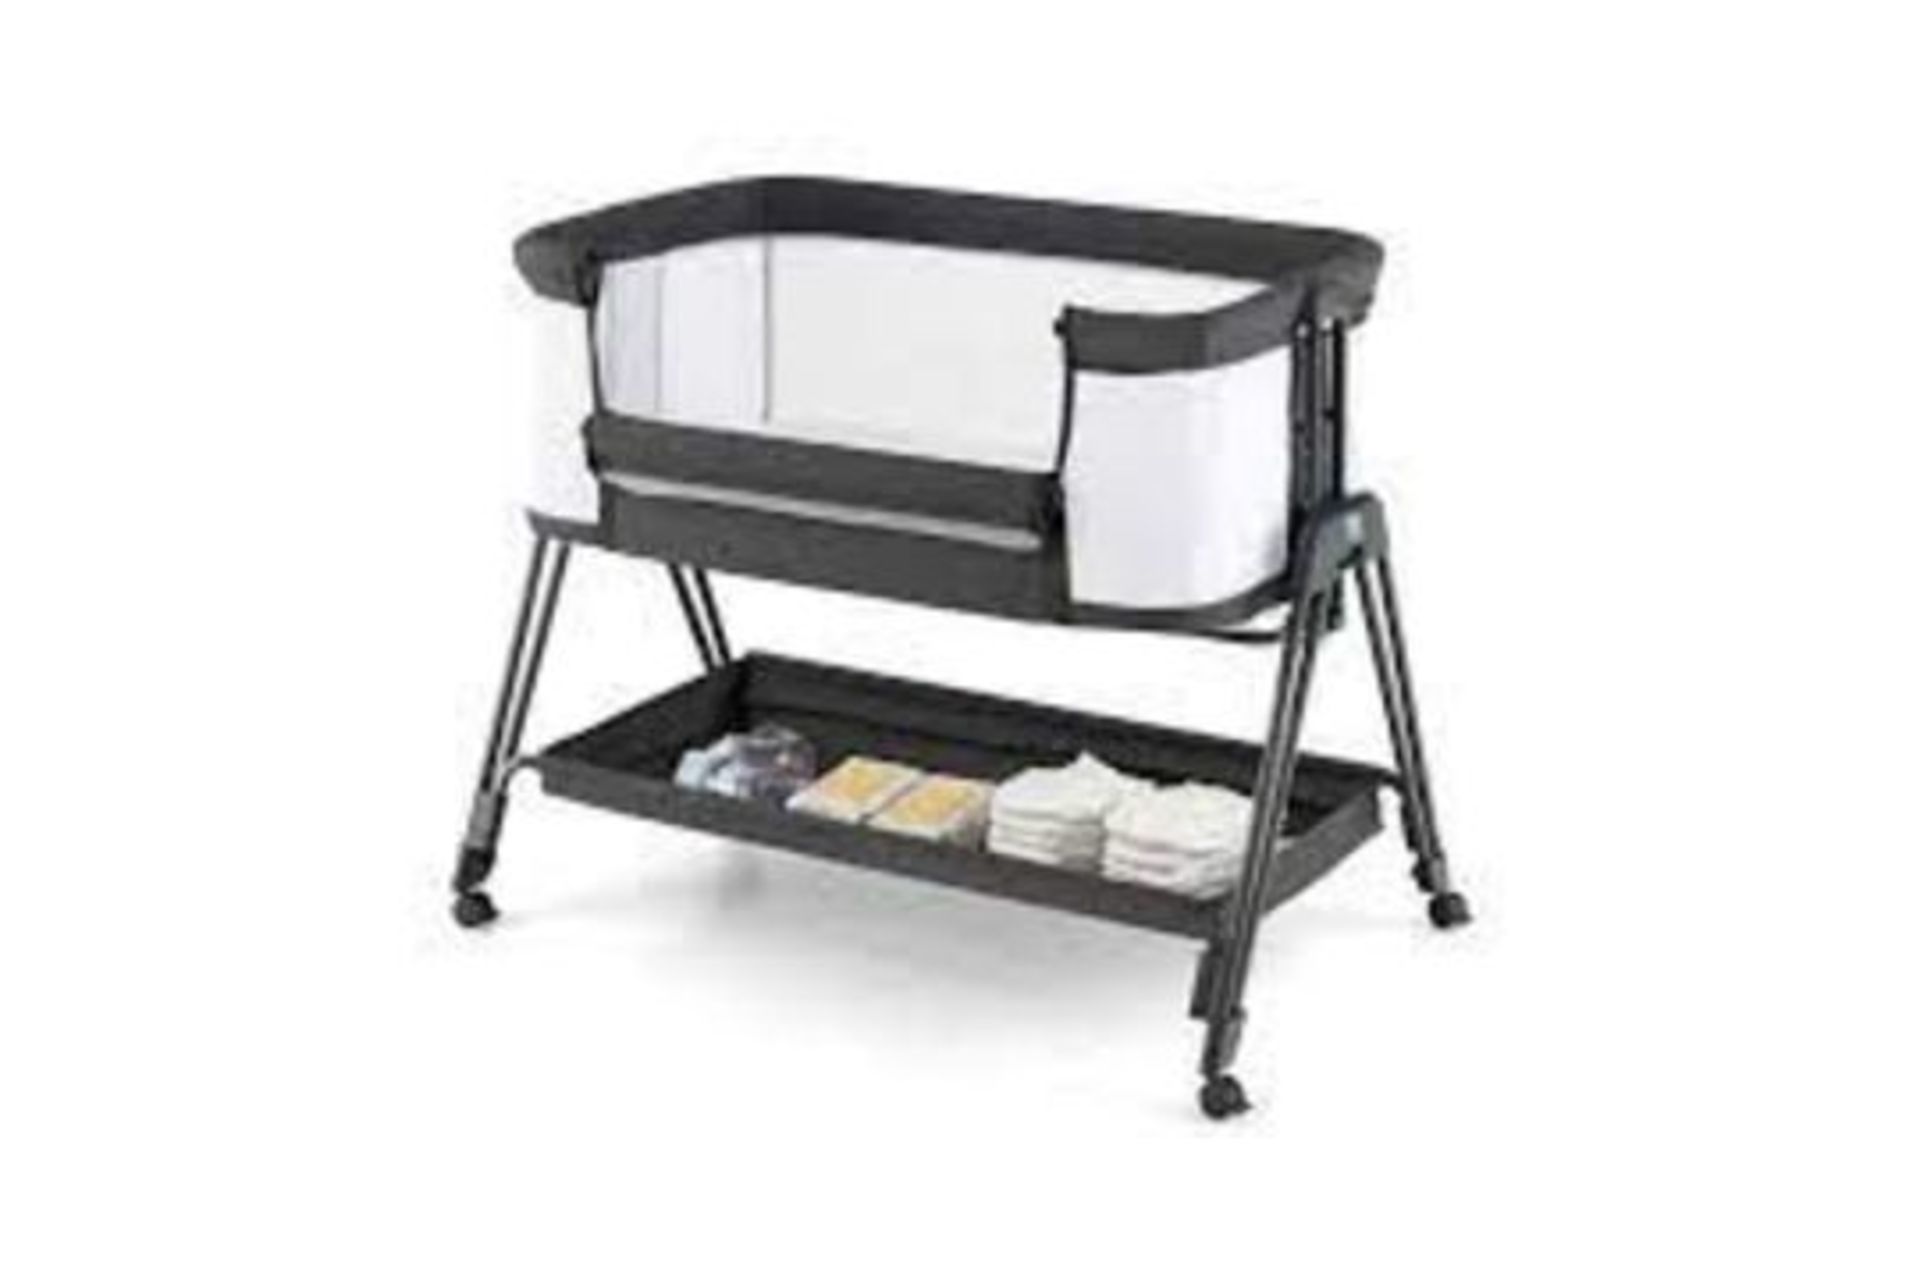 Baby Bedside Crib with Mattress for Birth. - R14.5. This baby bedside sleeper helps new parents to